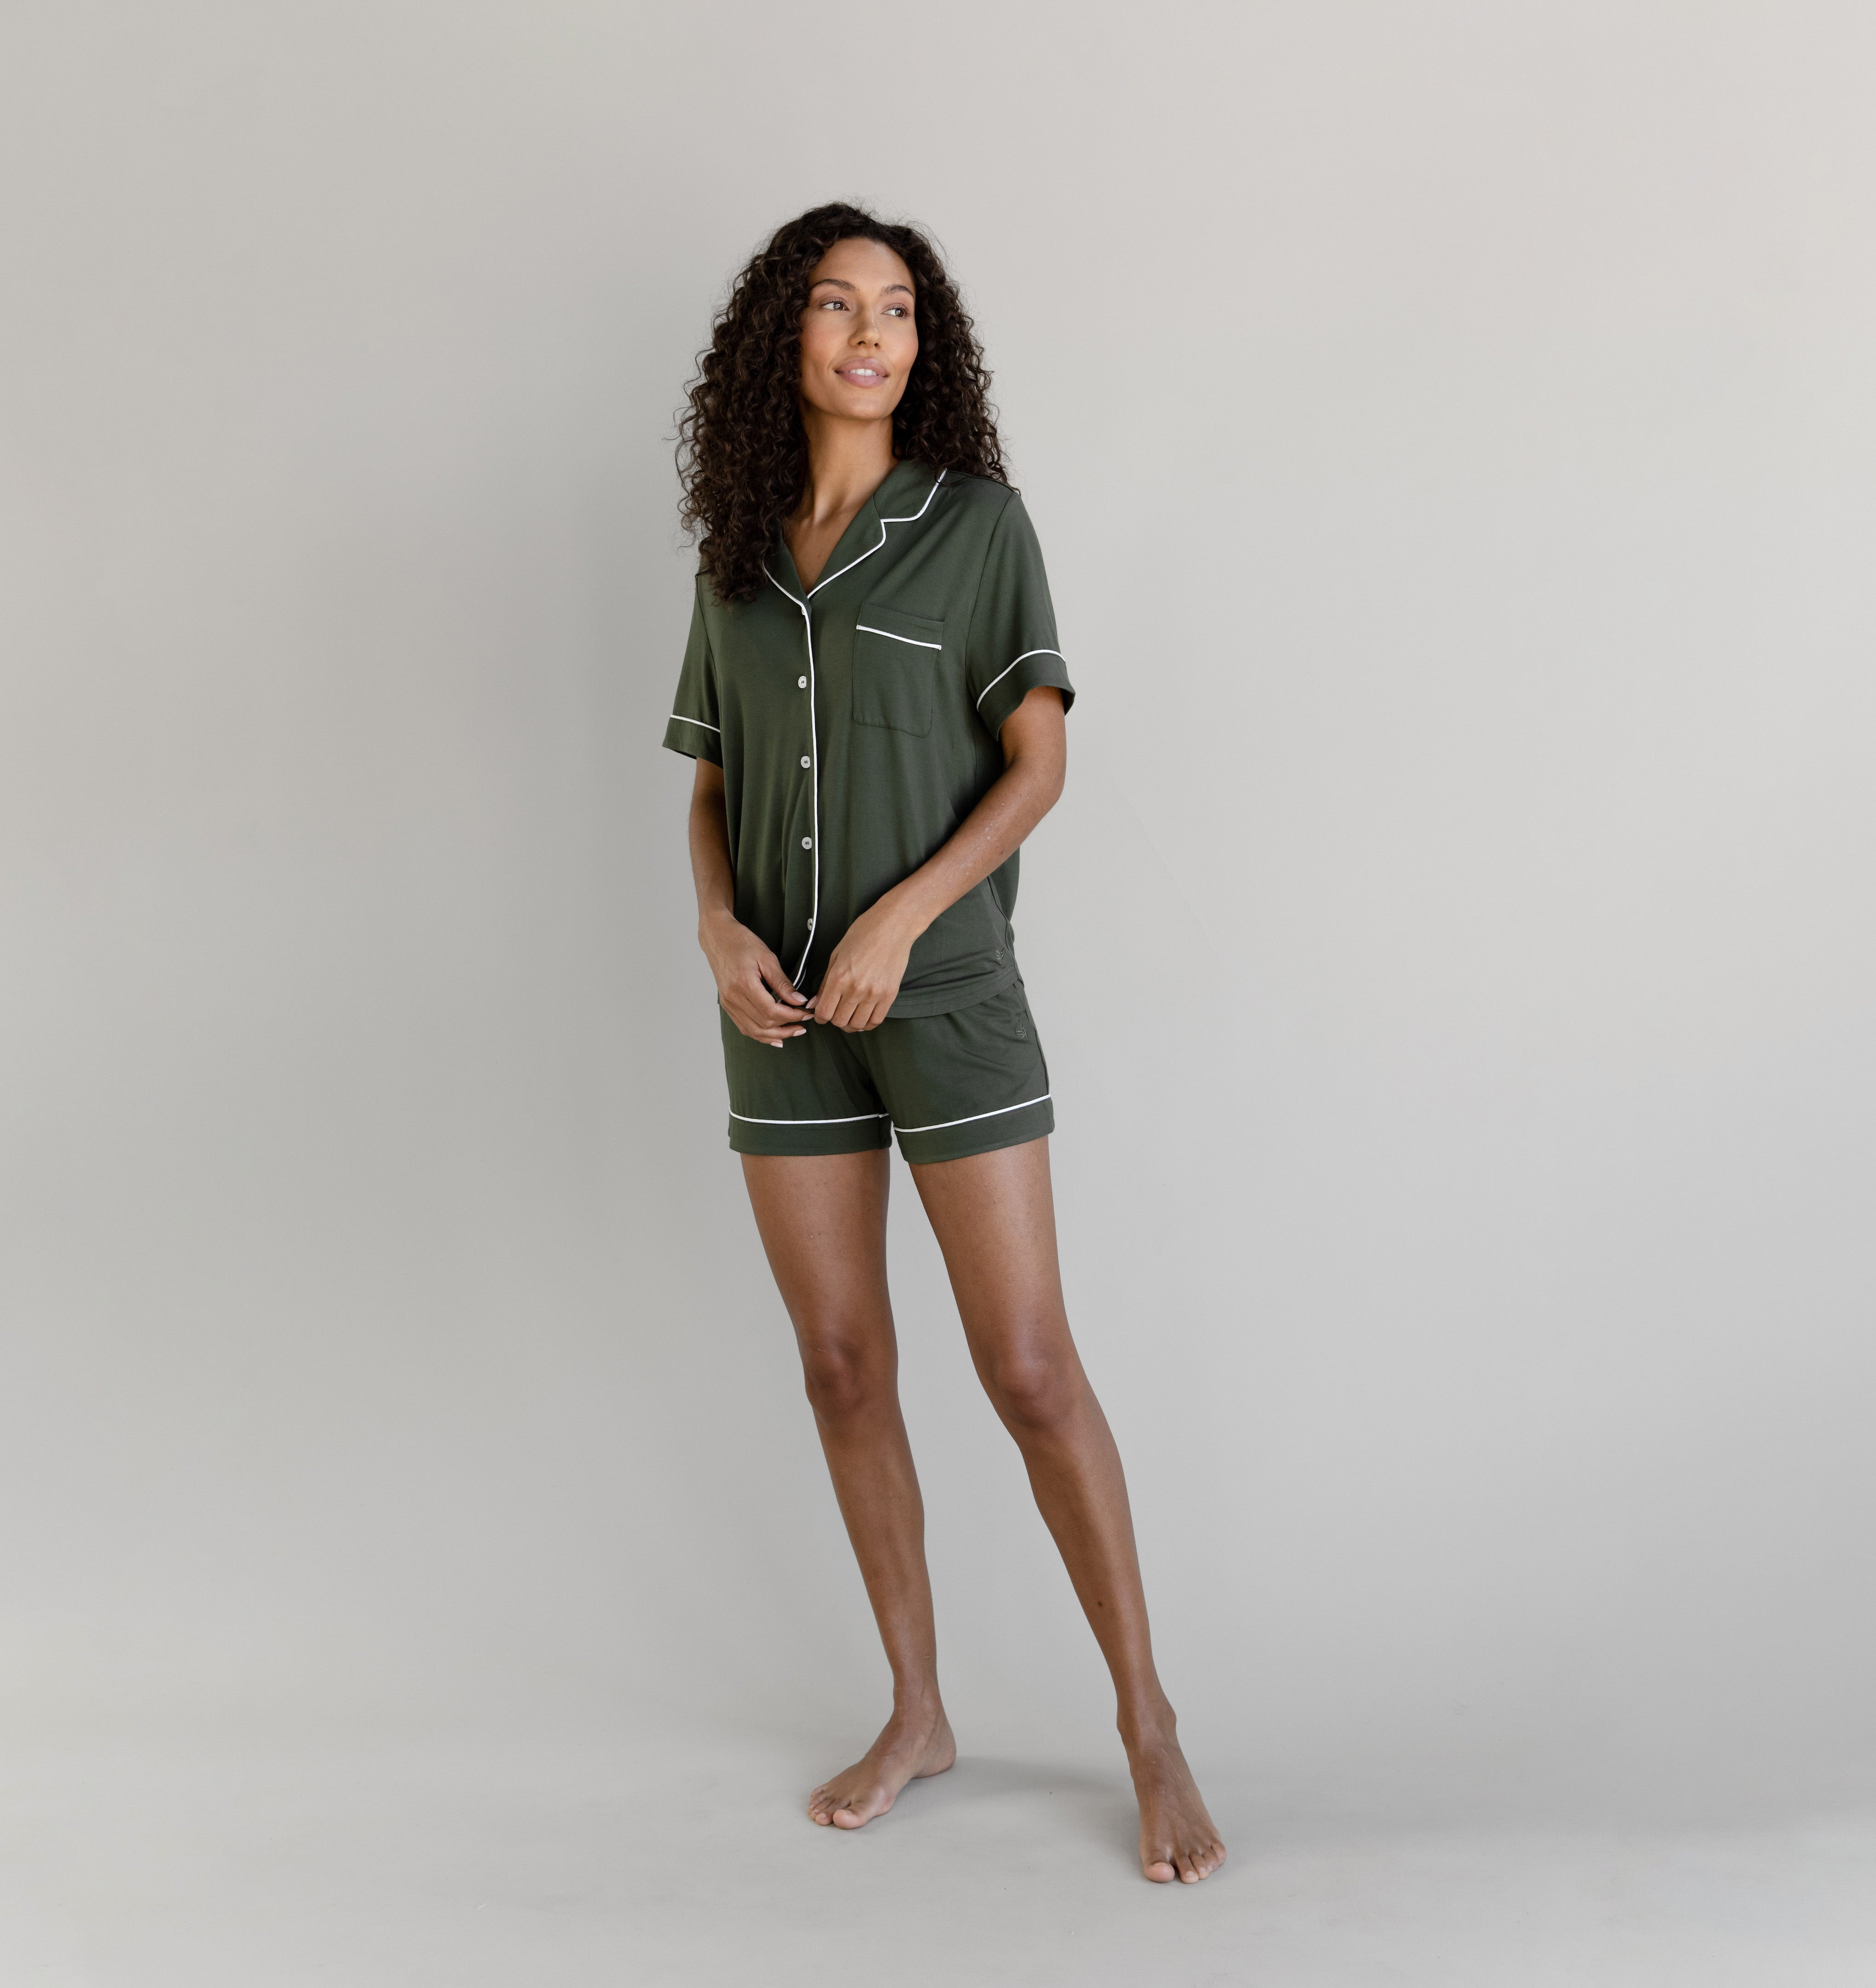 Olive Short Sleeve Pajama Set modeled by a women. The photo was taken in a light setting; showing off the pajamas. |Color:Olive